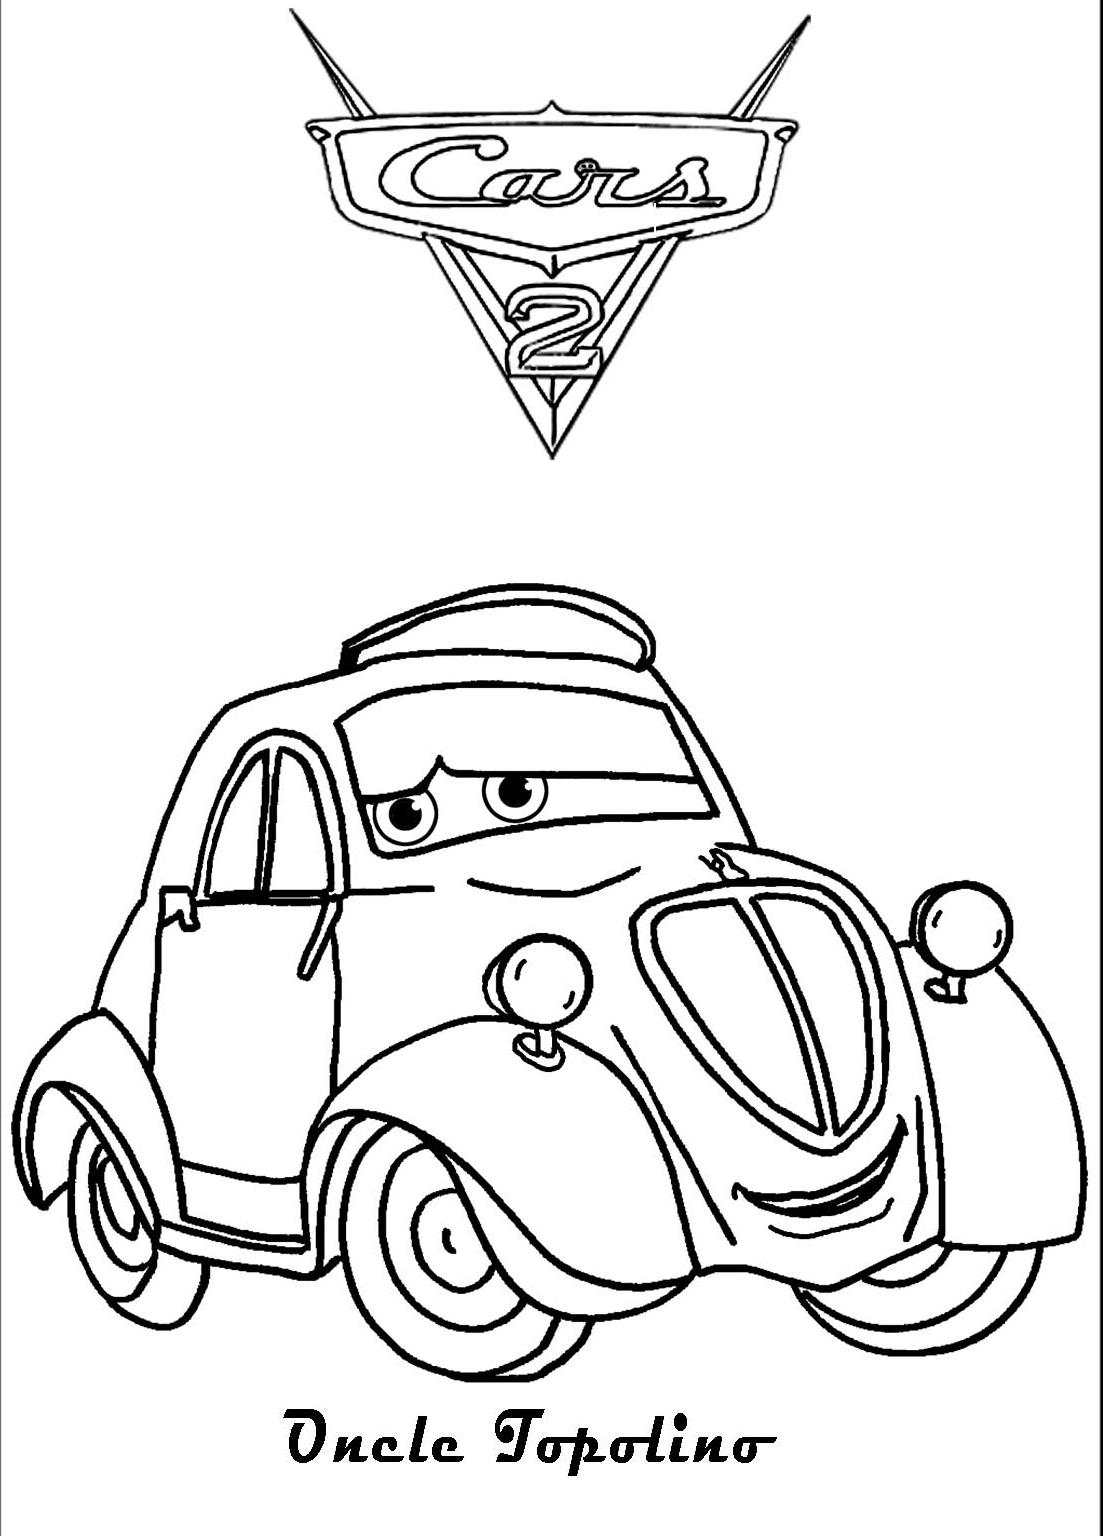 uncle grandpa coloring pages to print - photo #23